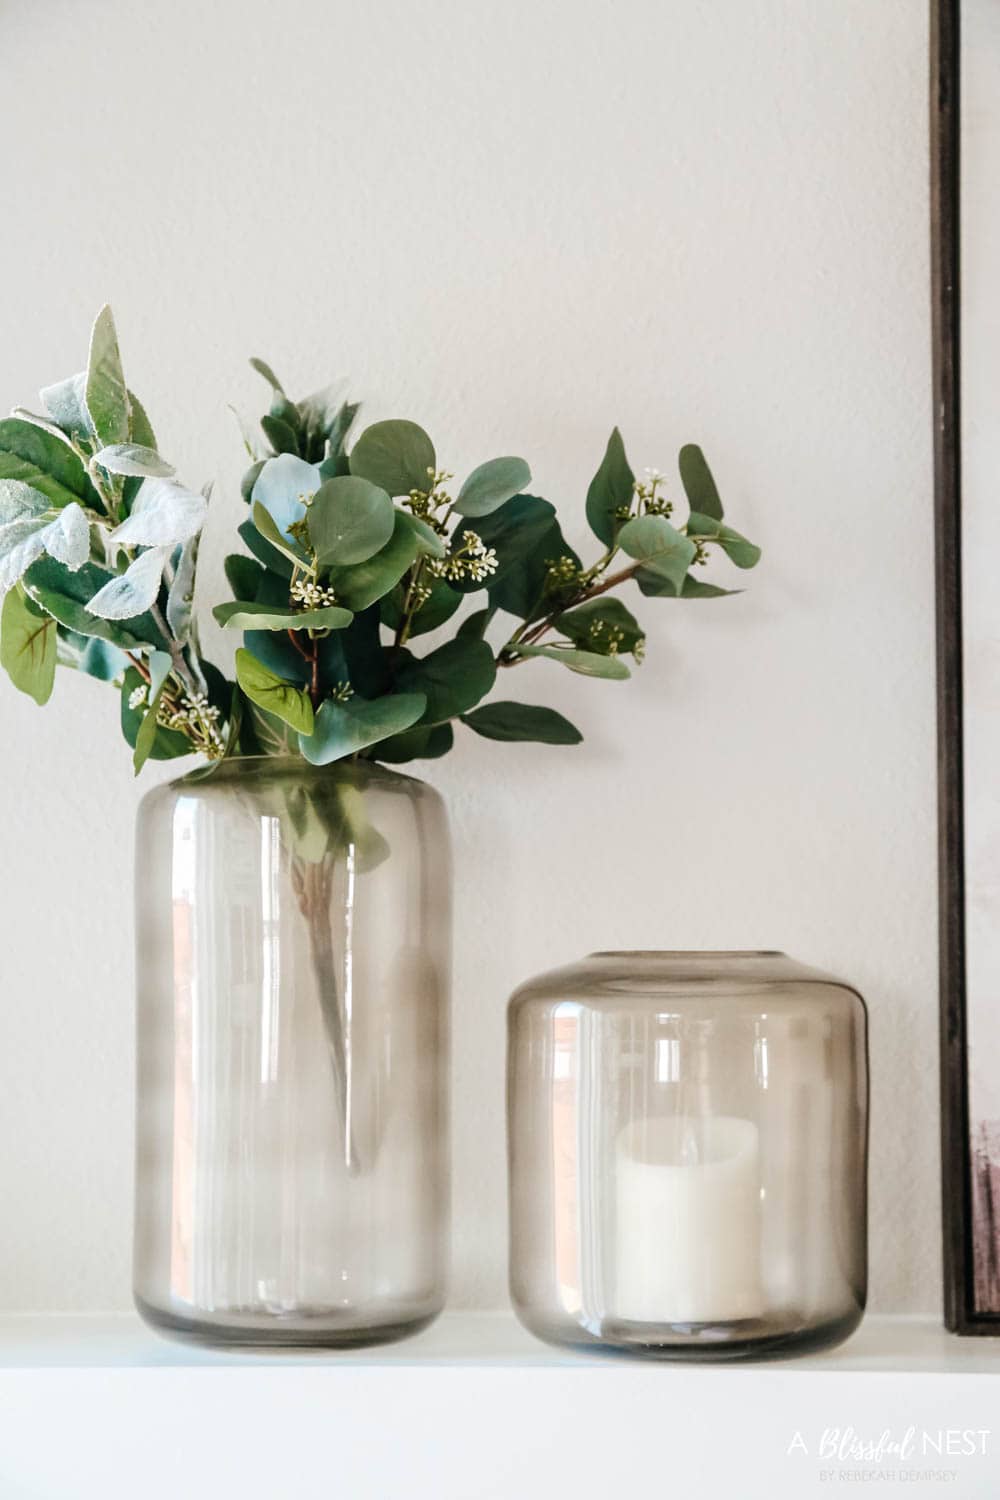 Smoke grey colored hurricane vases with eucalyptus leaves coming out of them.